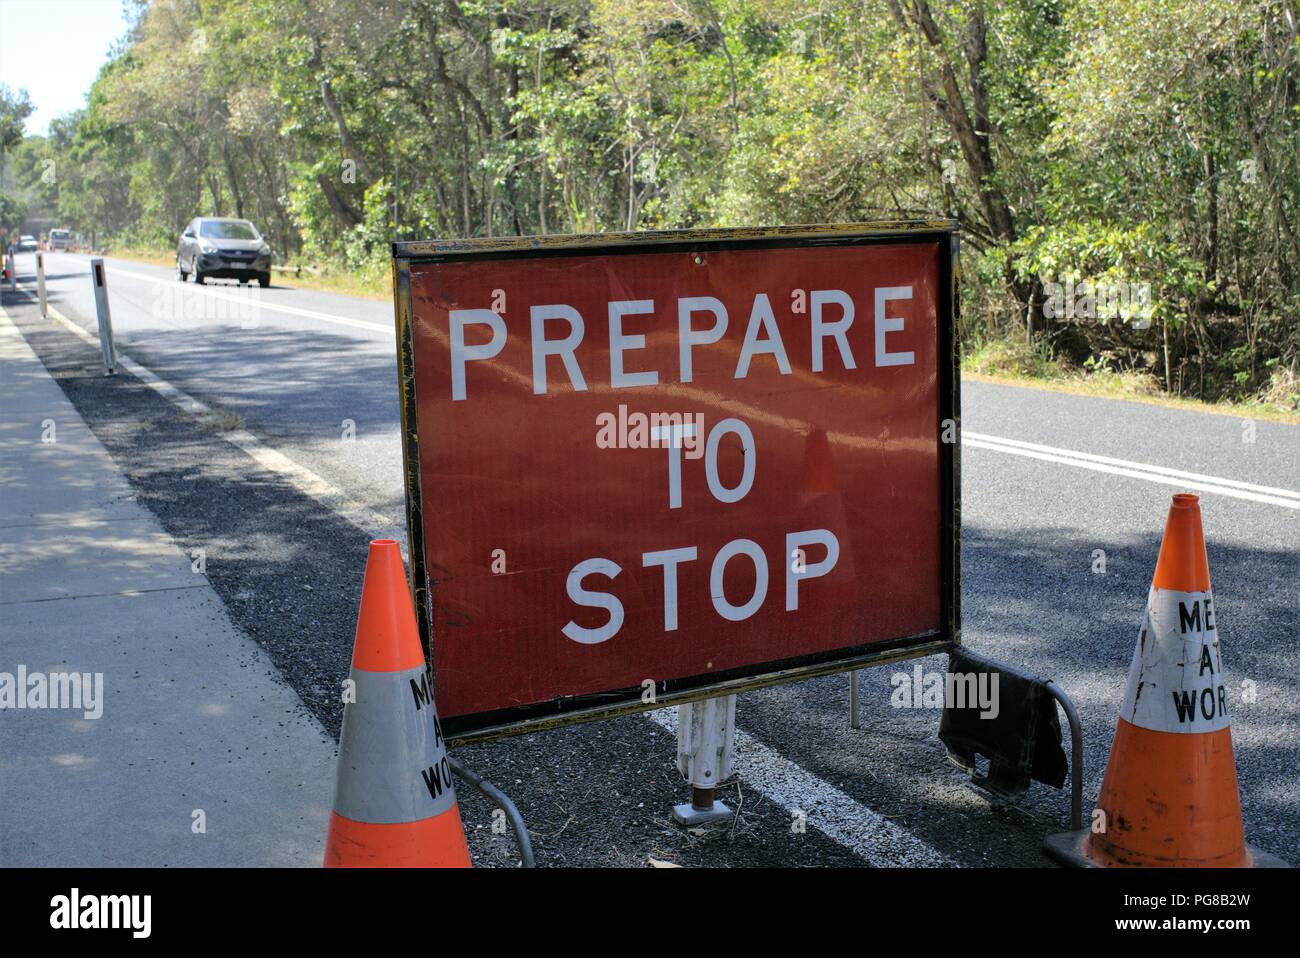 'Prepare to stop' on road sign board in Australia. Caution for drivers sign for traffic changes on Australian city street. Stock Photo